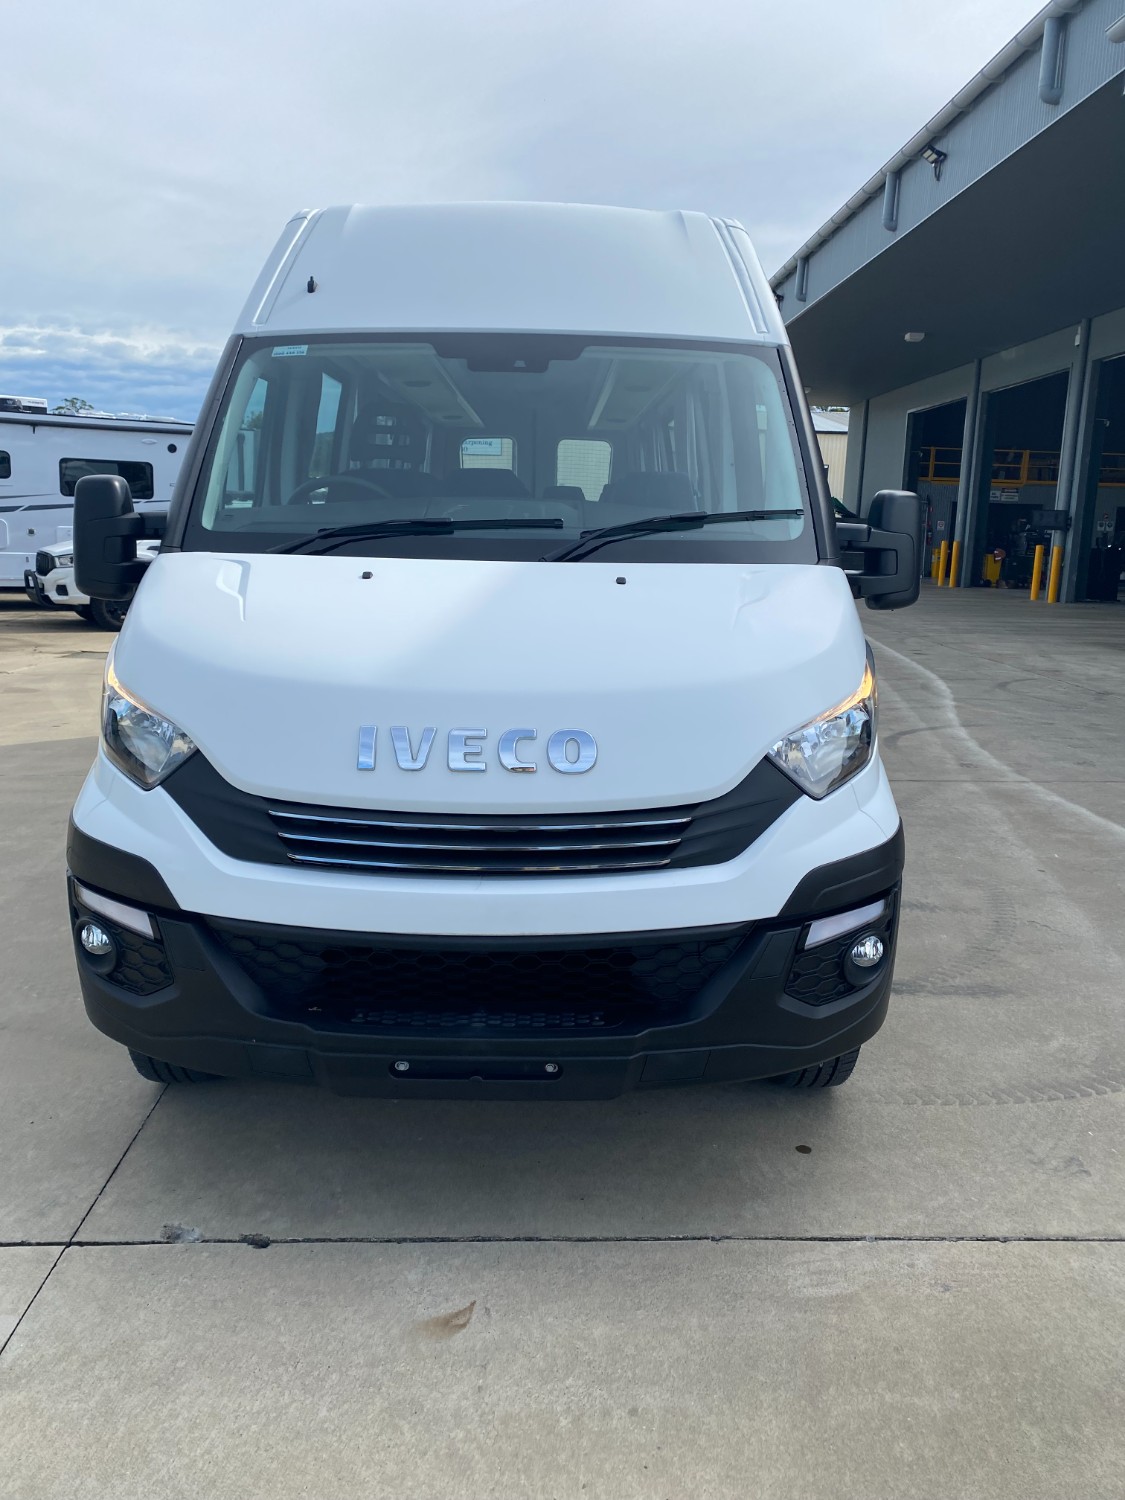 2021 Iveco Daily Bus Image 10